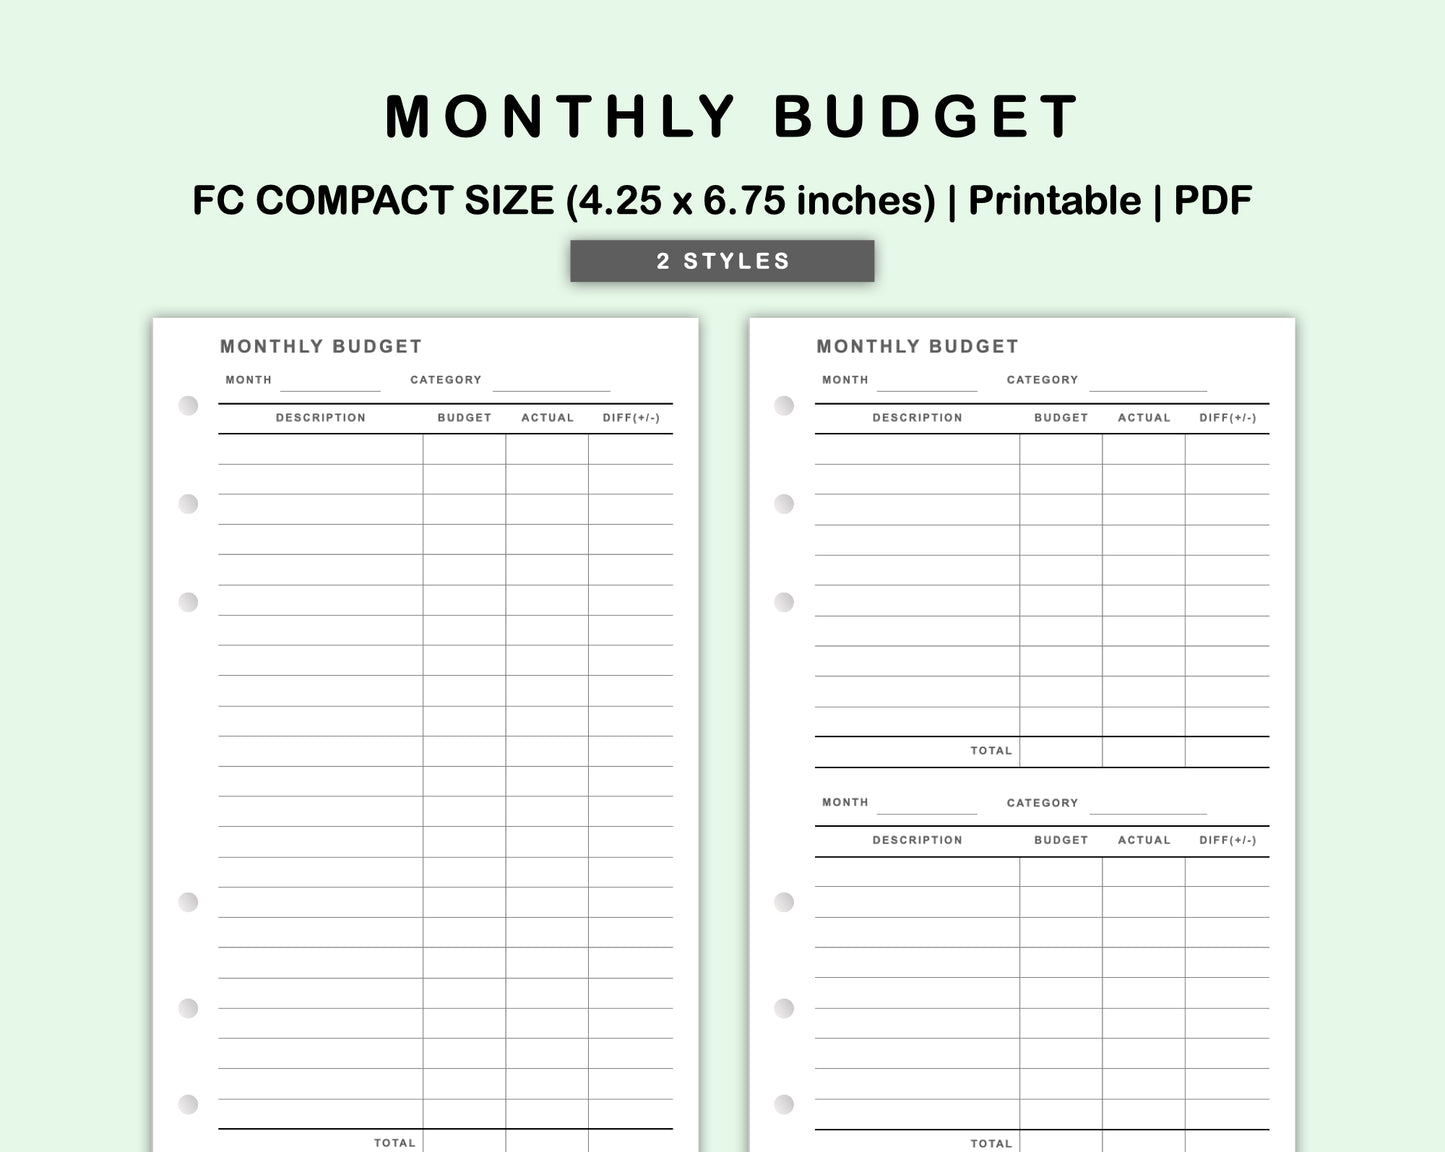 FC Compact Inserts - Monthly Budget